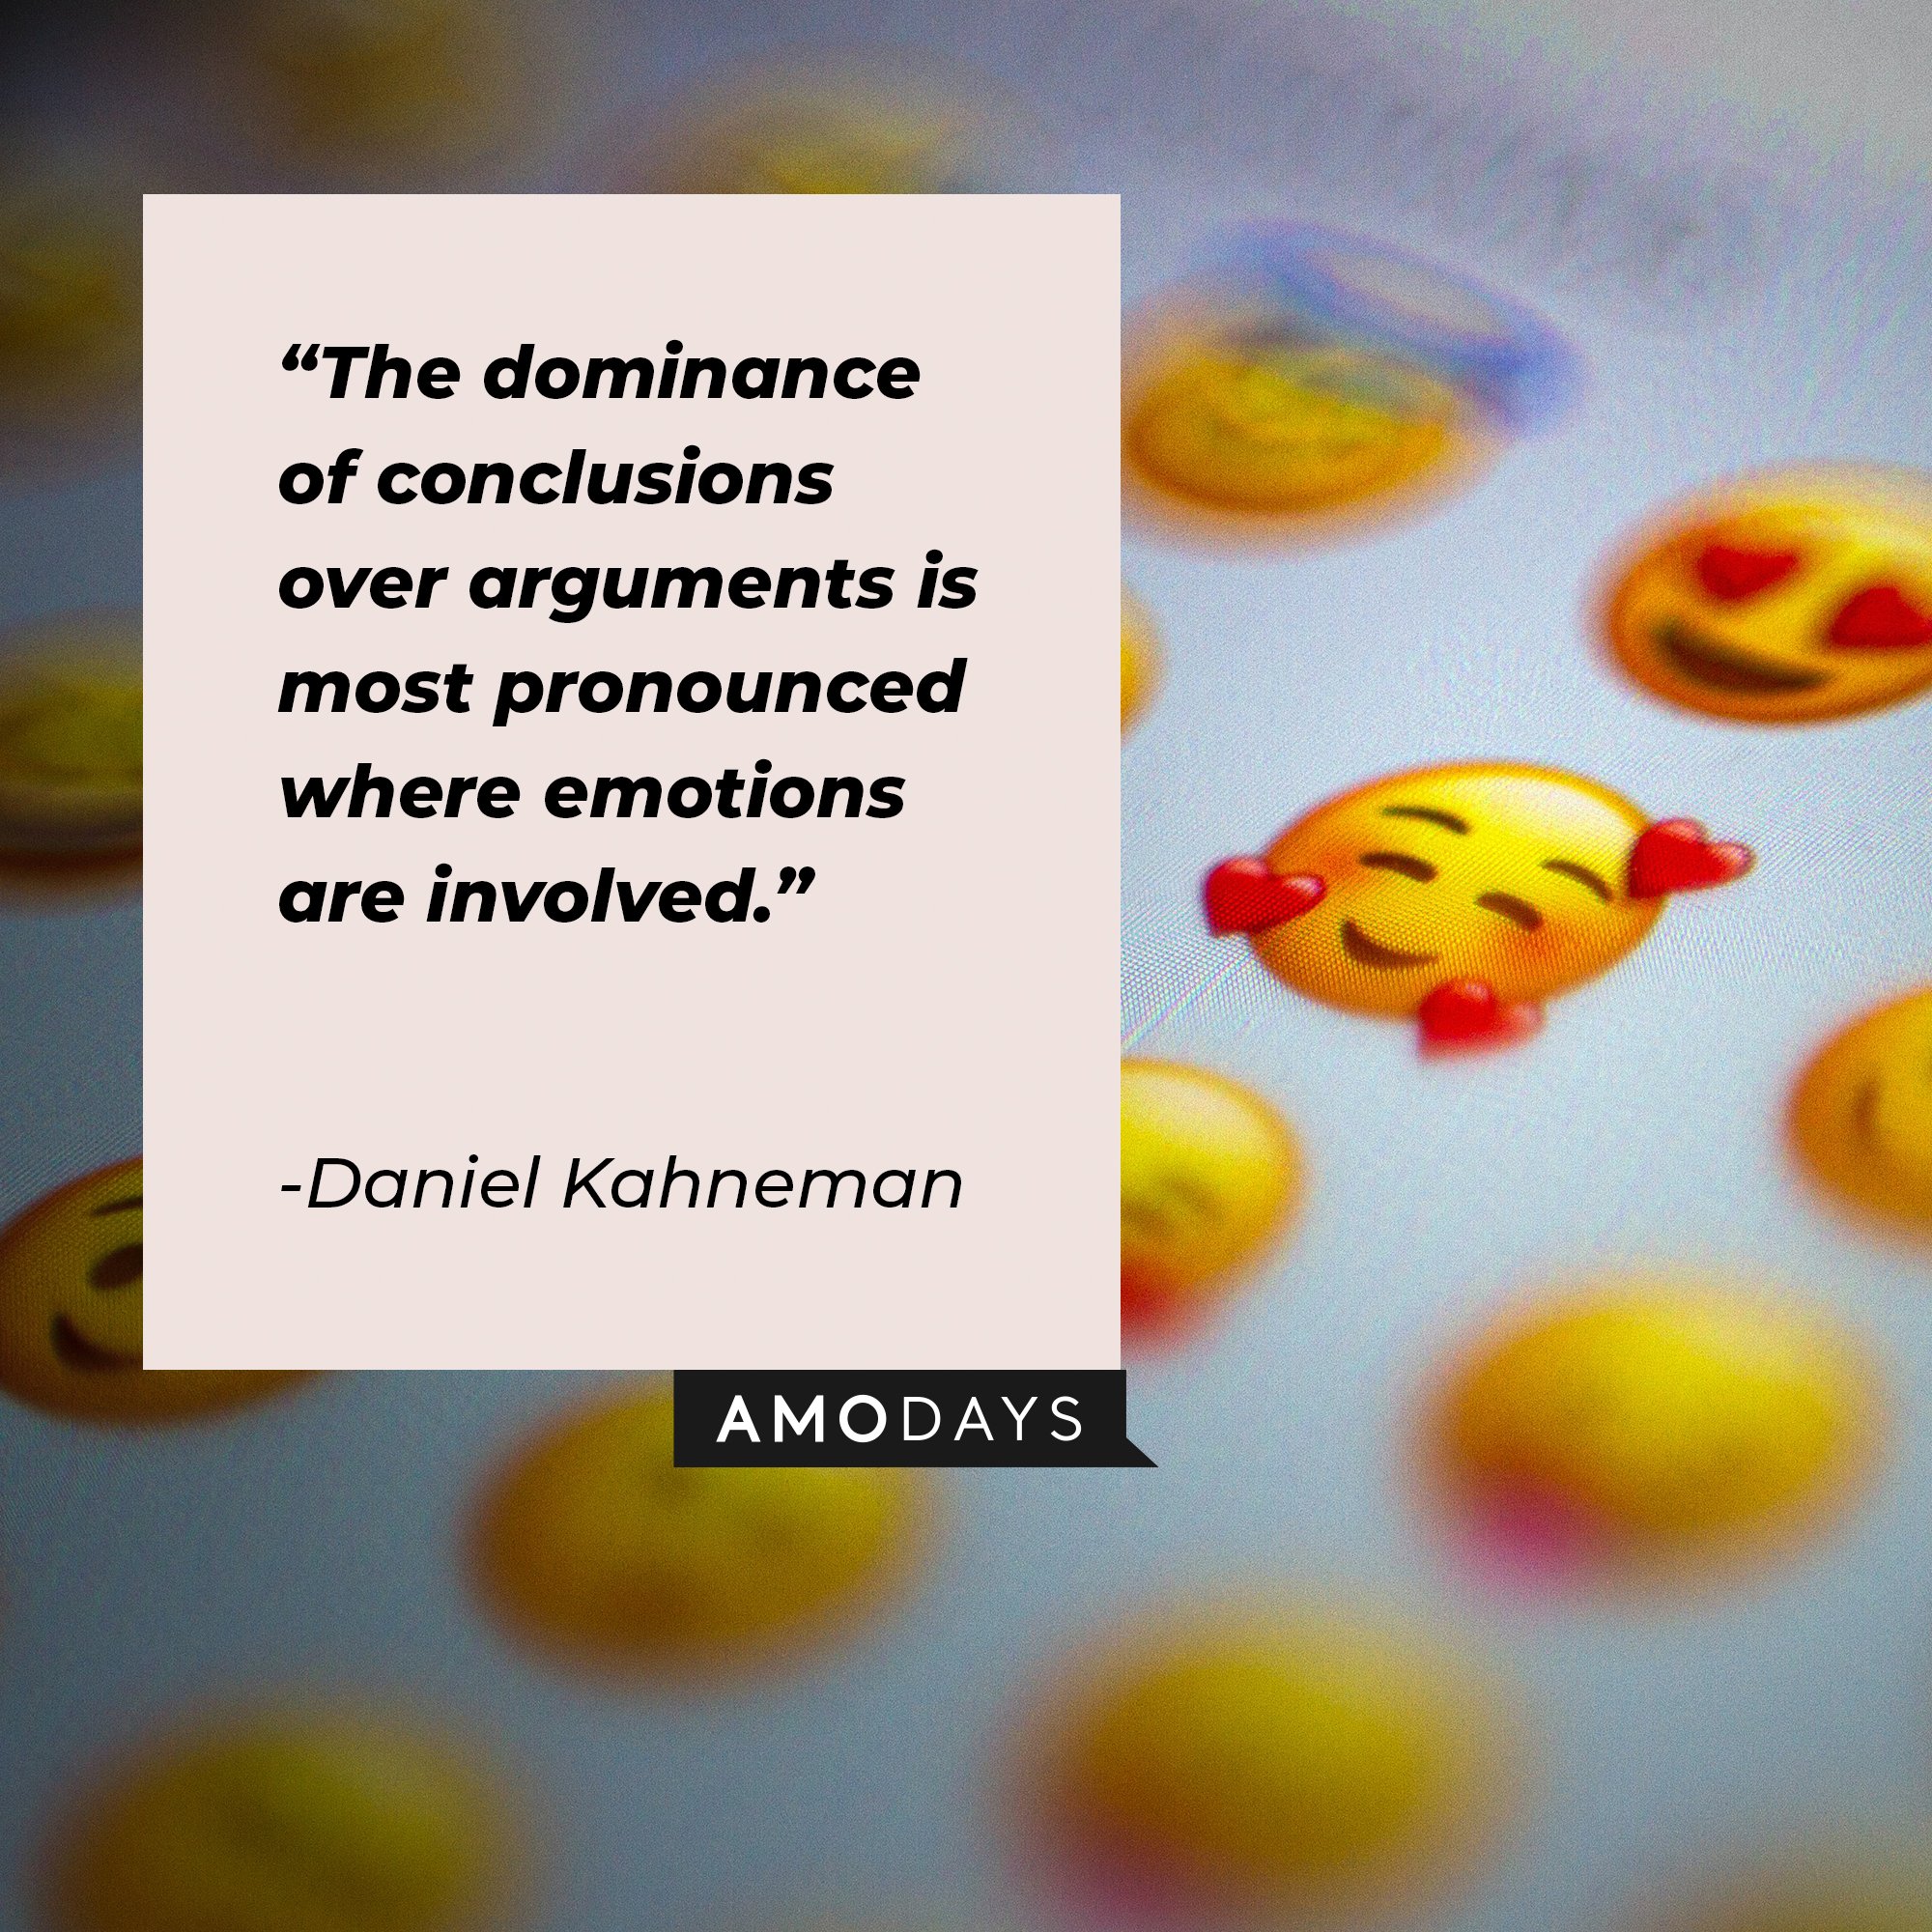 Daniel Kahneman’s quote: "The dominance of conclusions over arguments is most pronounced where emotions are involved.” | Image: AmoDays 